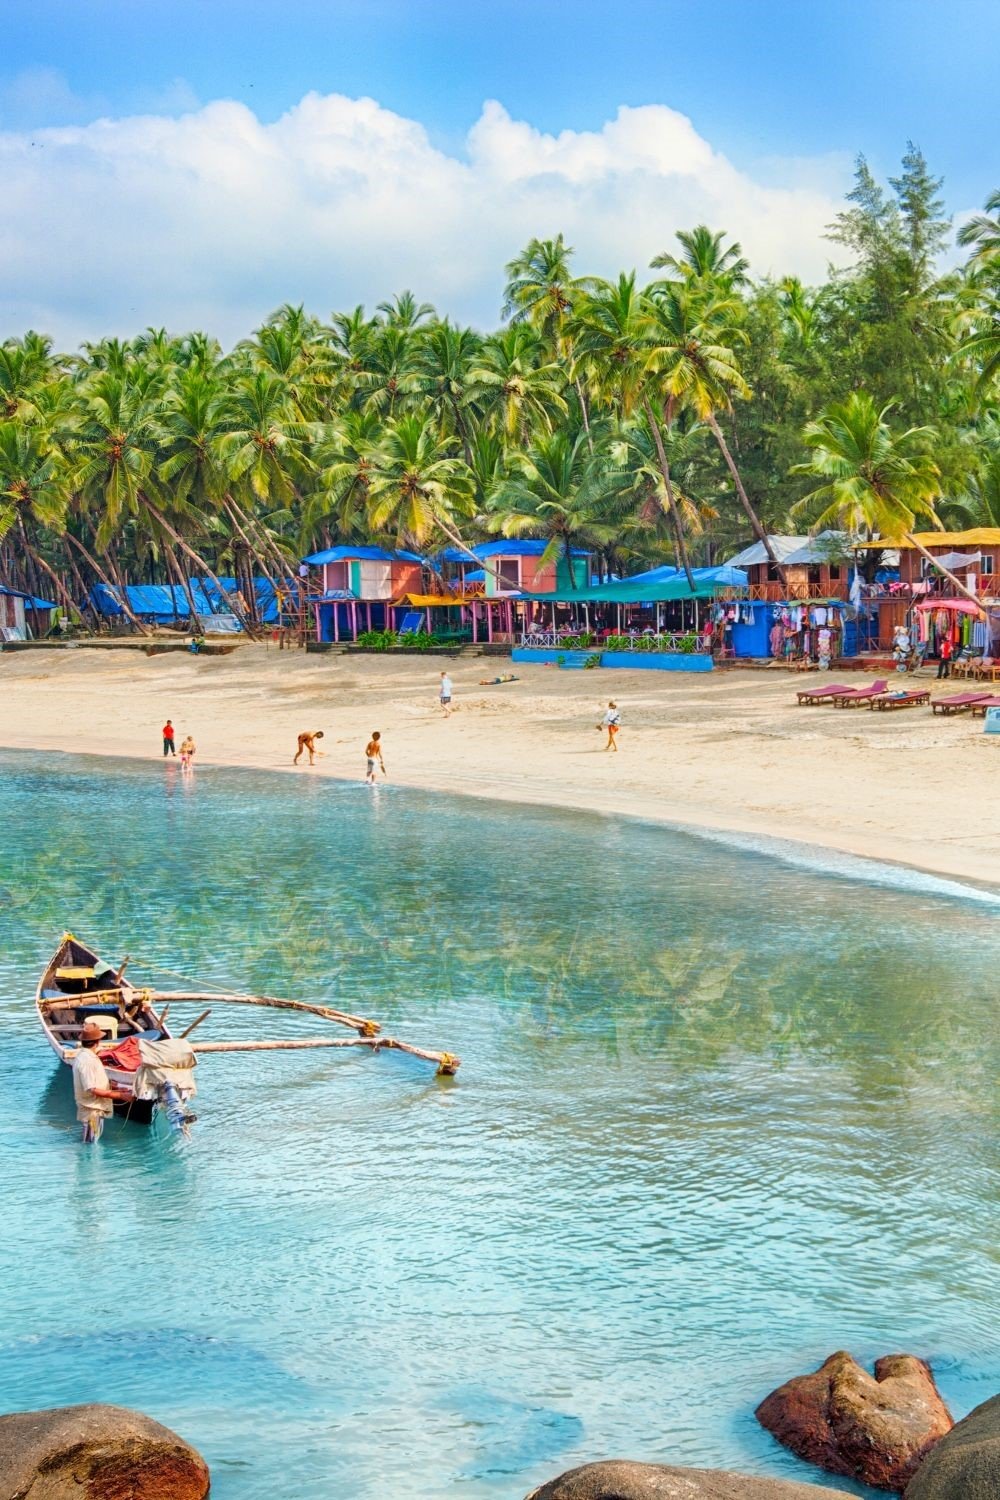 Must-see places and must-do activities in Goa